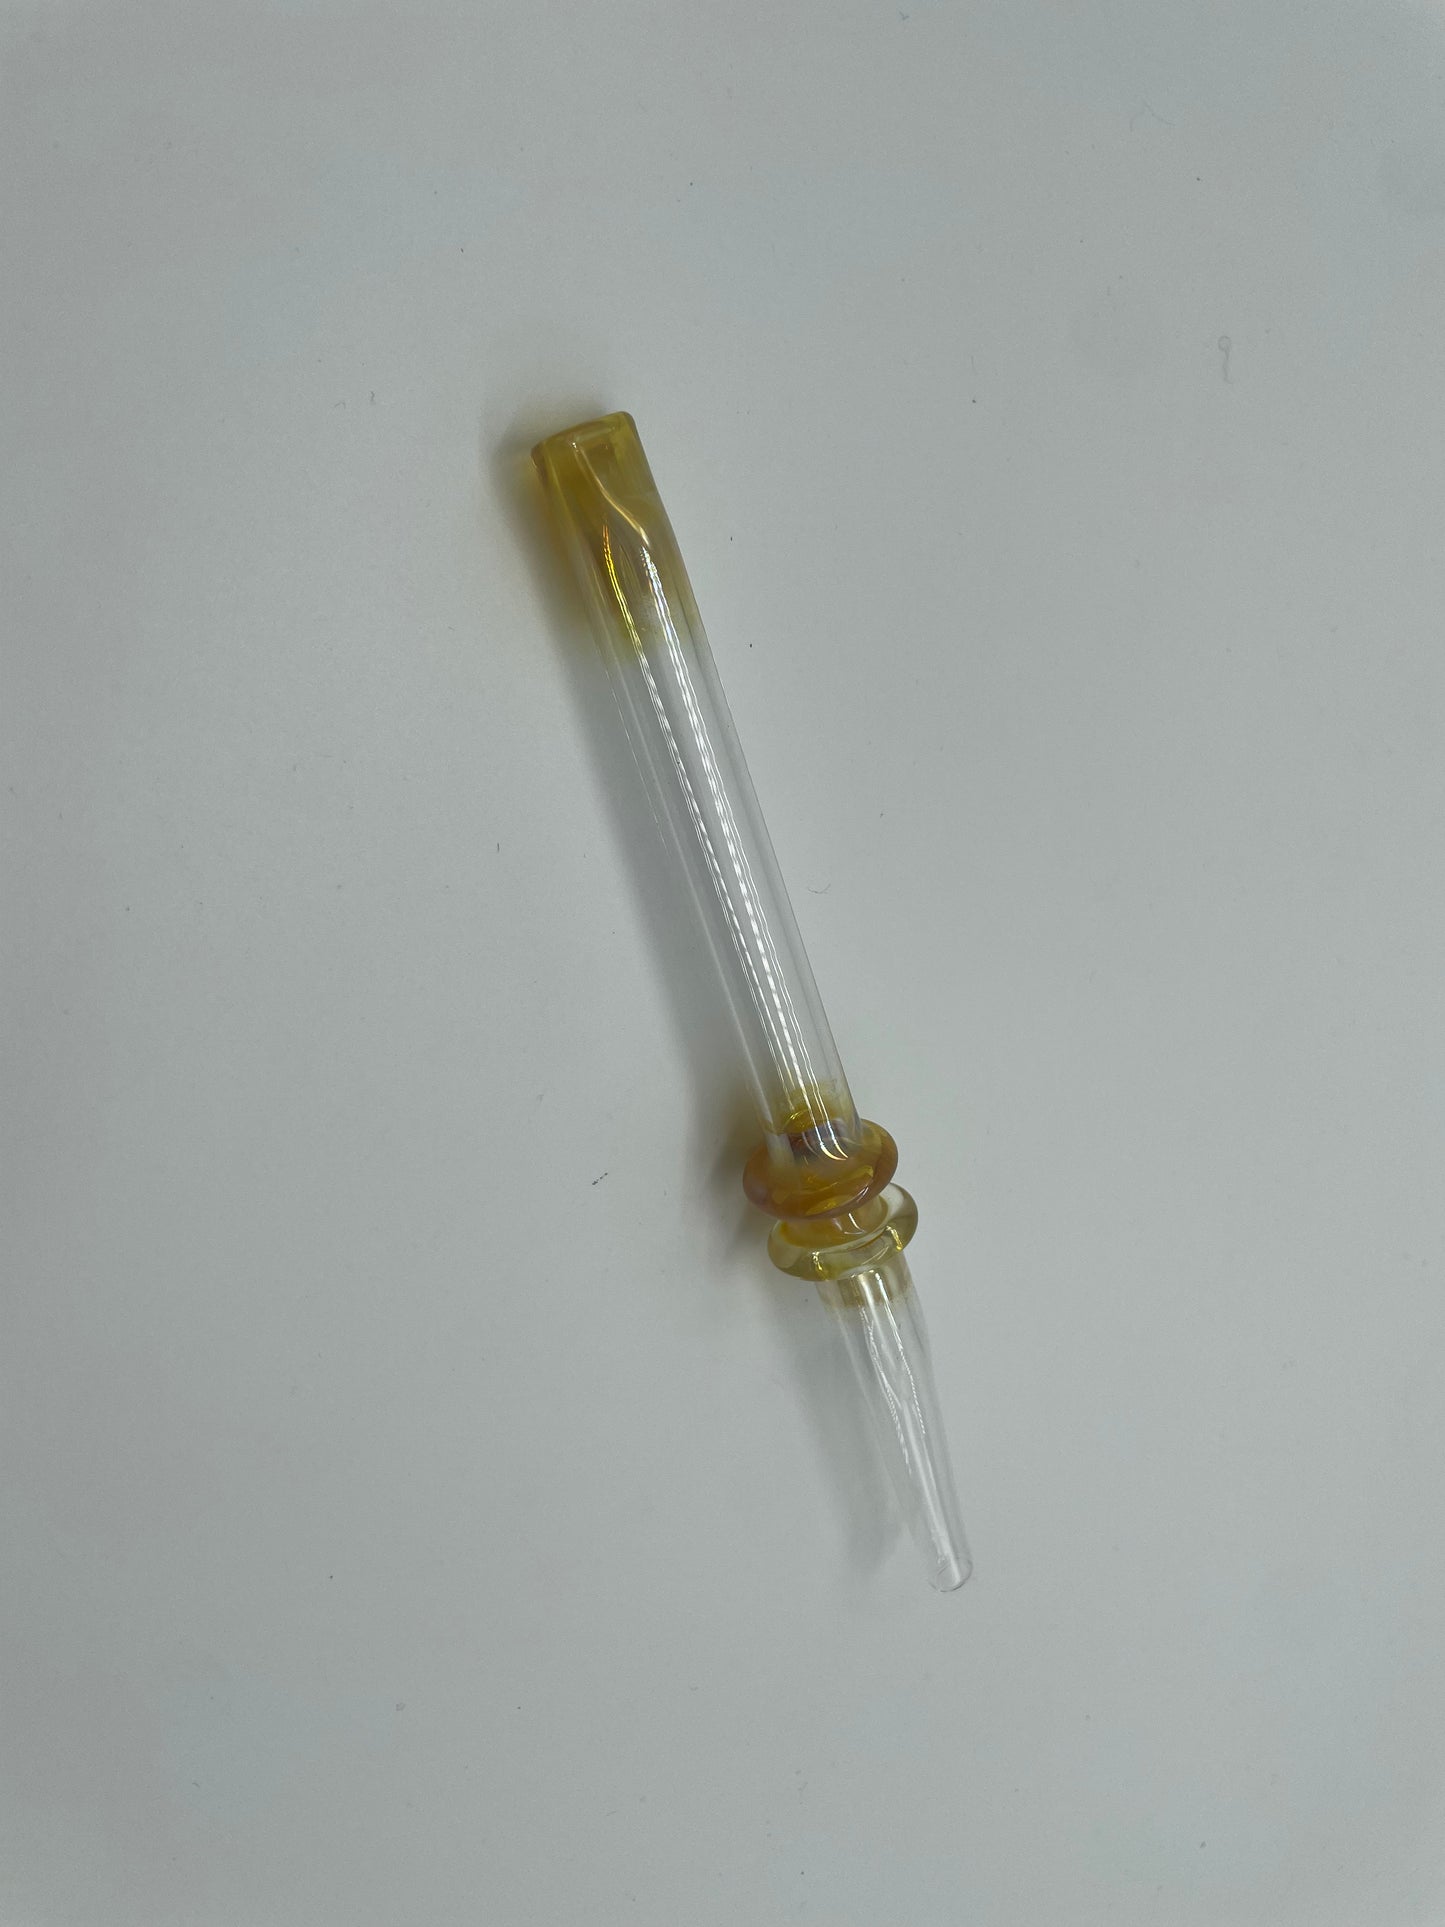 Nectar Collector 6" Glass 2 rings Gold Fumed